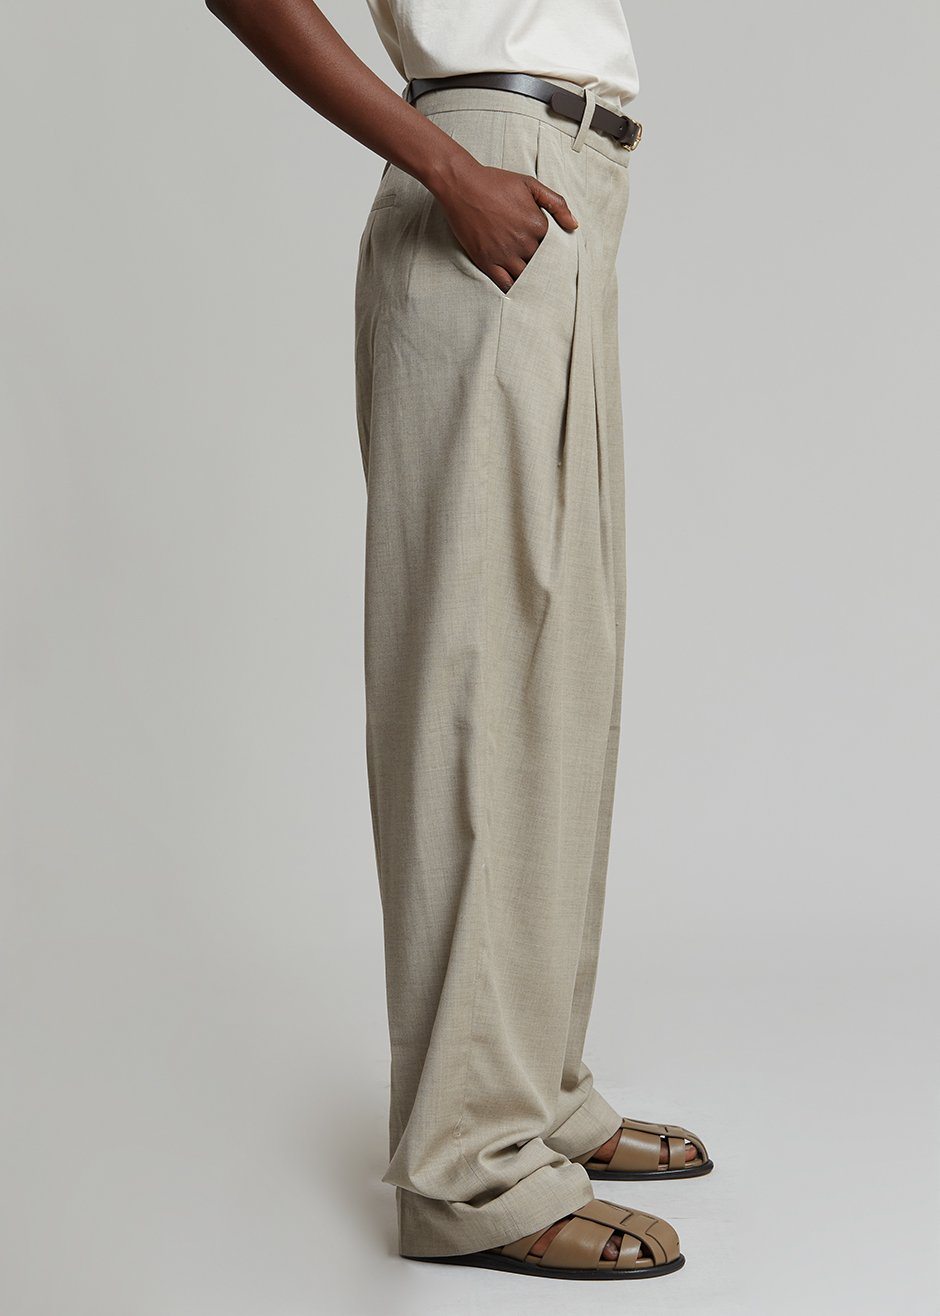 Gelso Pleated Trousers - Light Taupe Melange - 9